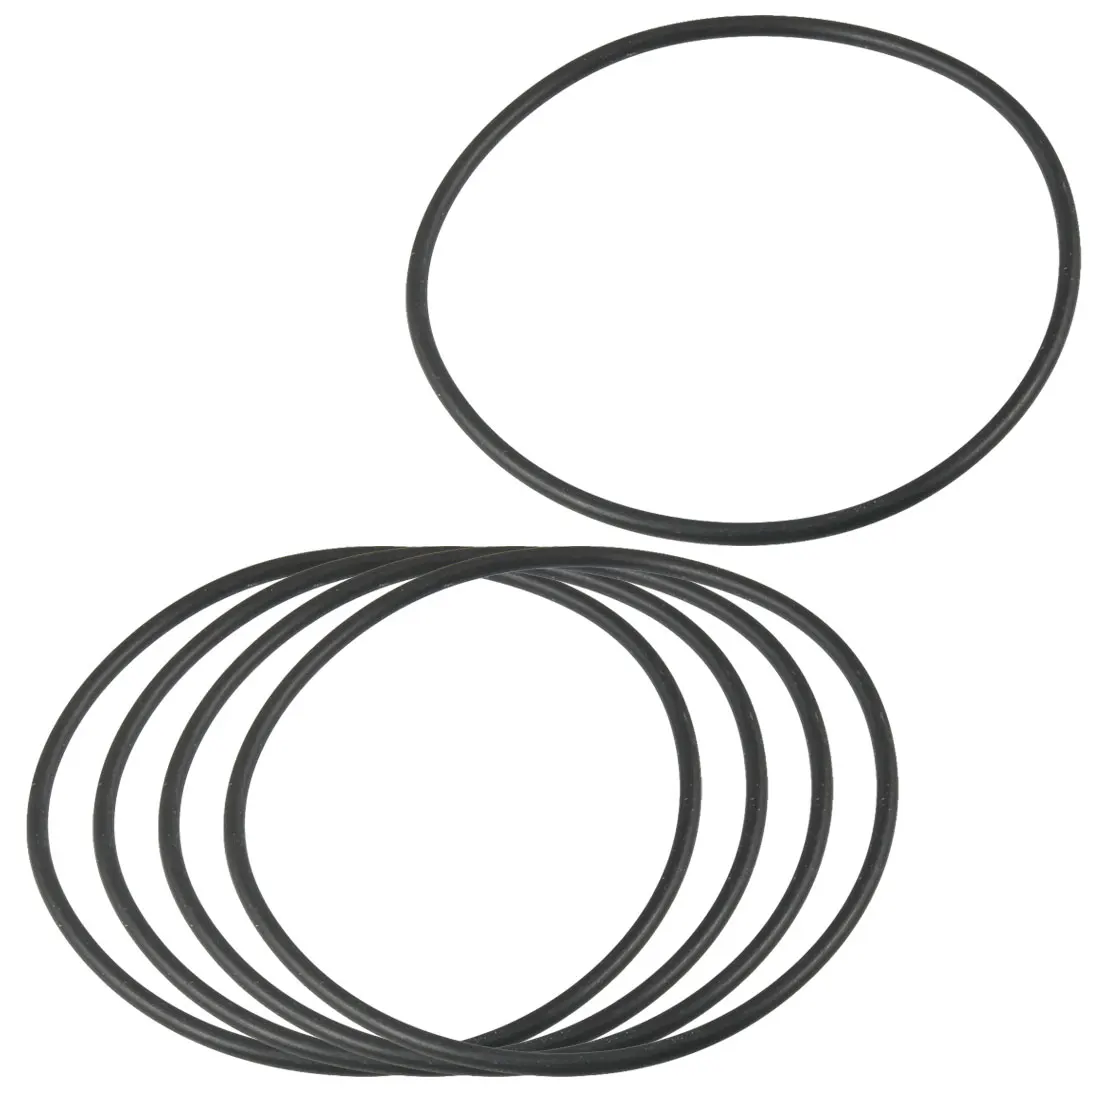 uxcell 150mm x 3.1mm Flexible Rubber O Ring Sealing Washer Black 5 Pcs